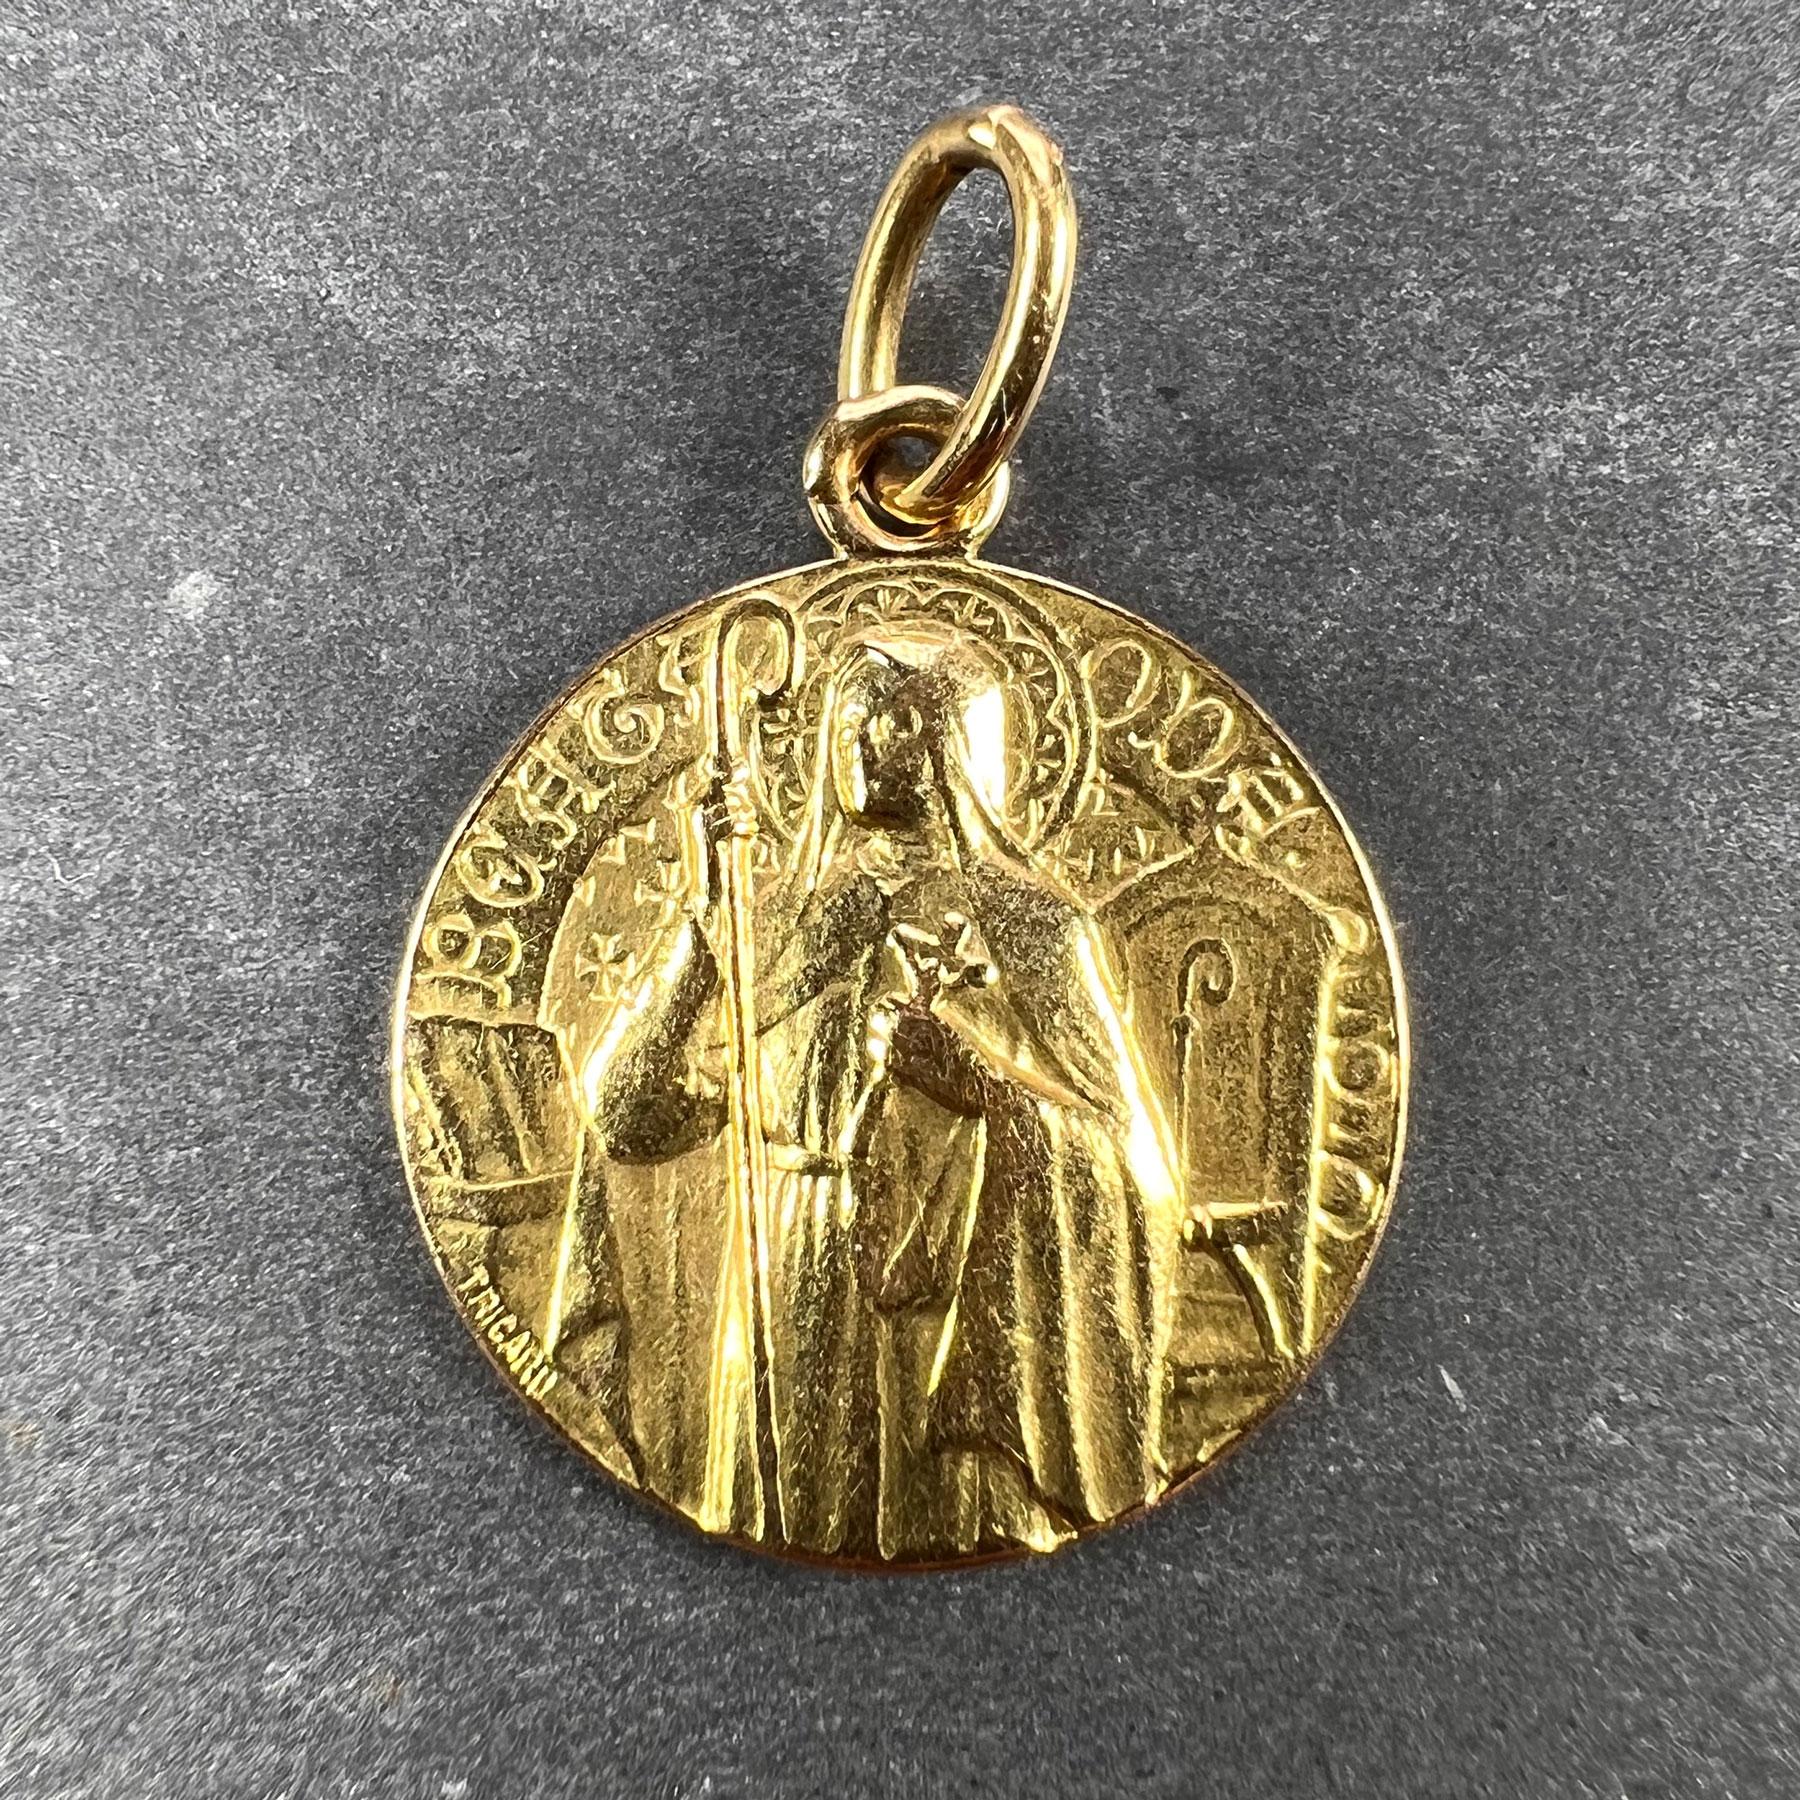 A French 18 karat (18K) yellow gold charm pendant designed as a medal depicting Saint Oda, inscribed ‘Beata Oda OPN’ (translation: ‘Blessed Oda pray for us’). Oda was born blind and was cured when she visited the relics of Saint Lambert. A wreath of